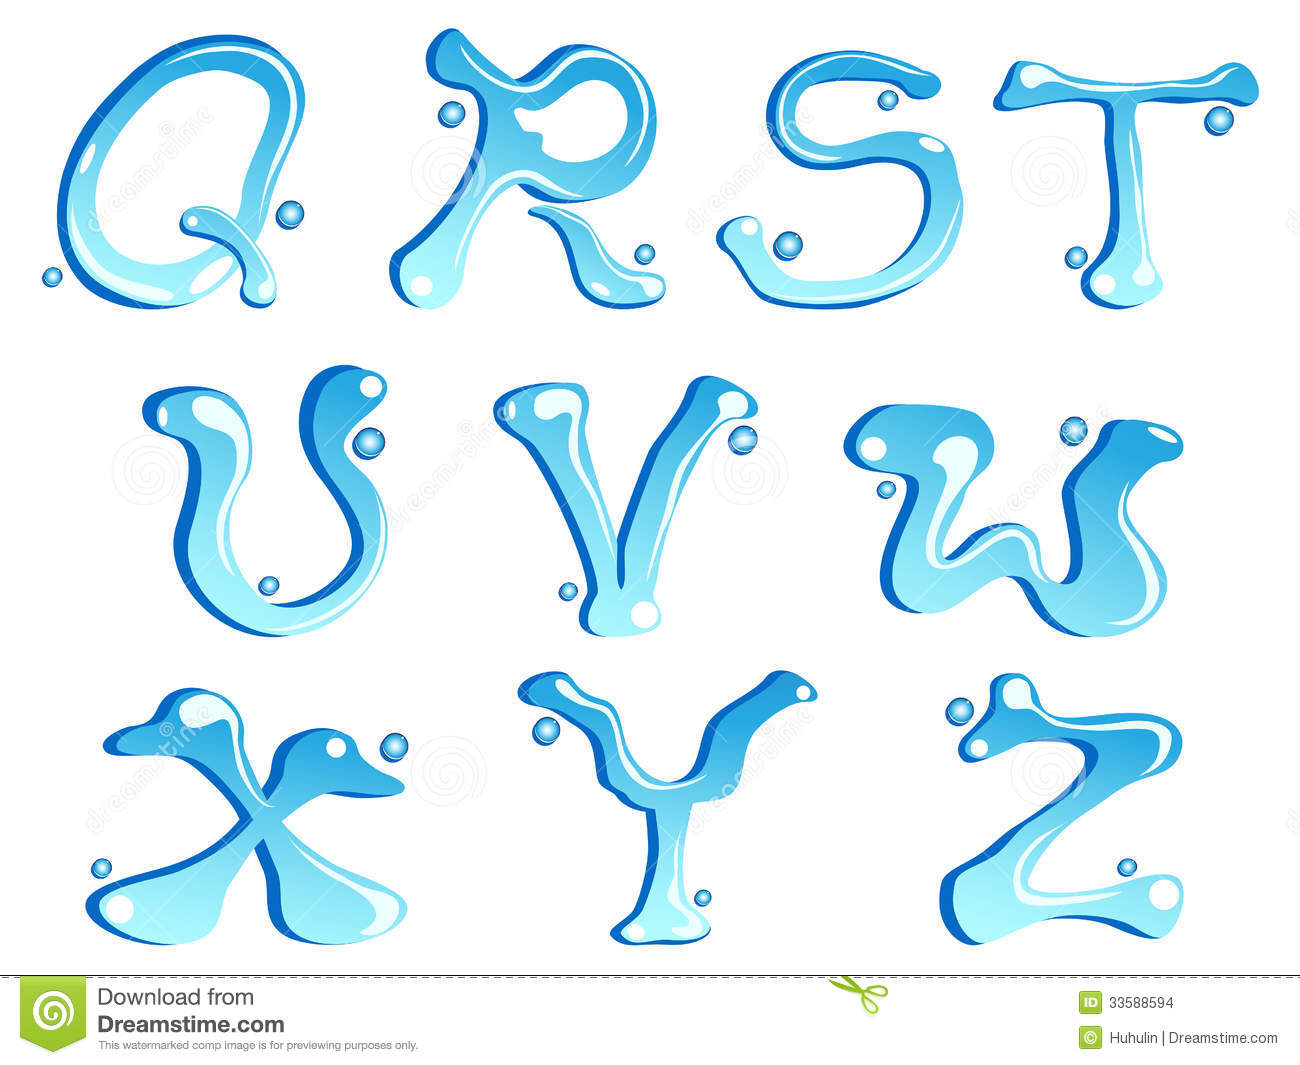 17 Water Alphabet Font Letters That Look Like Images